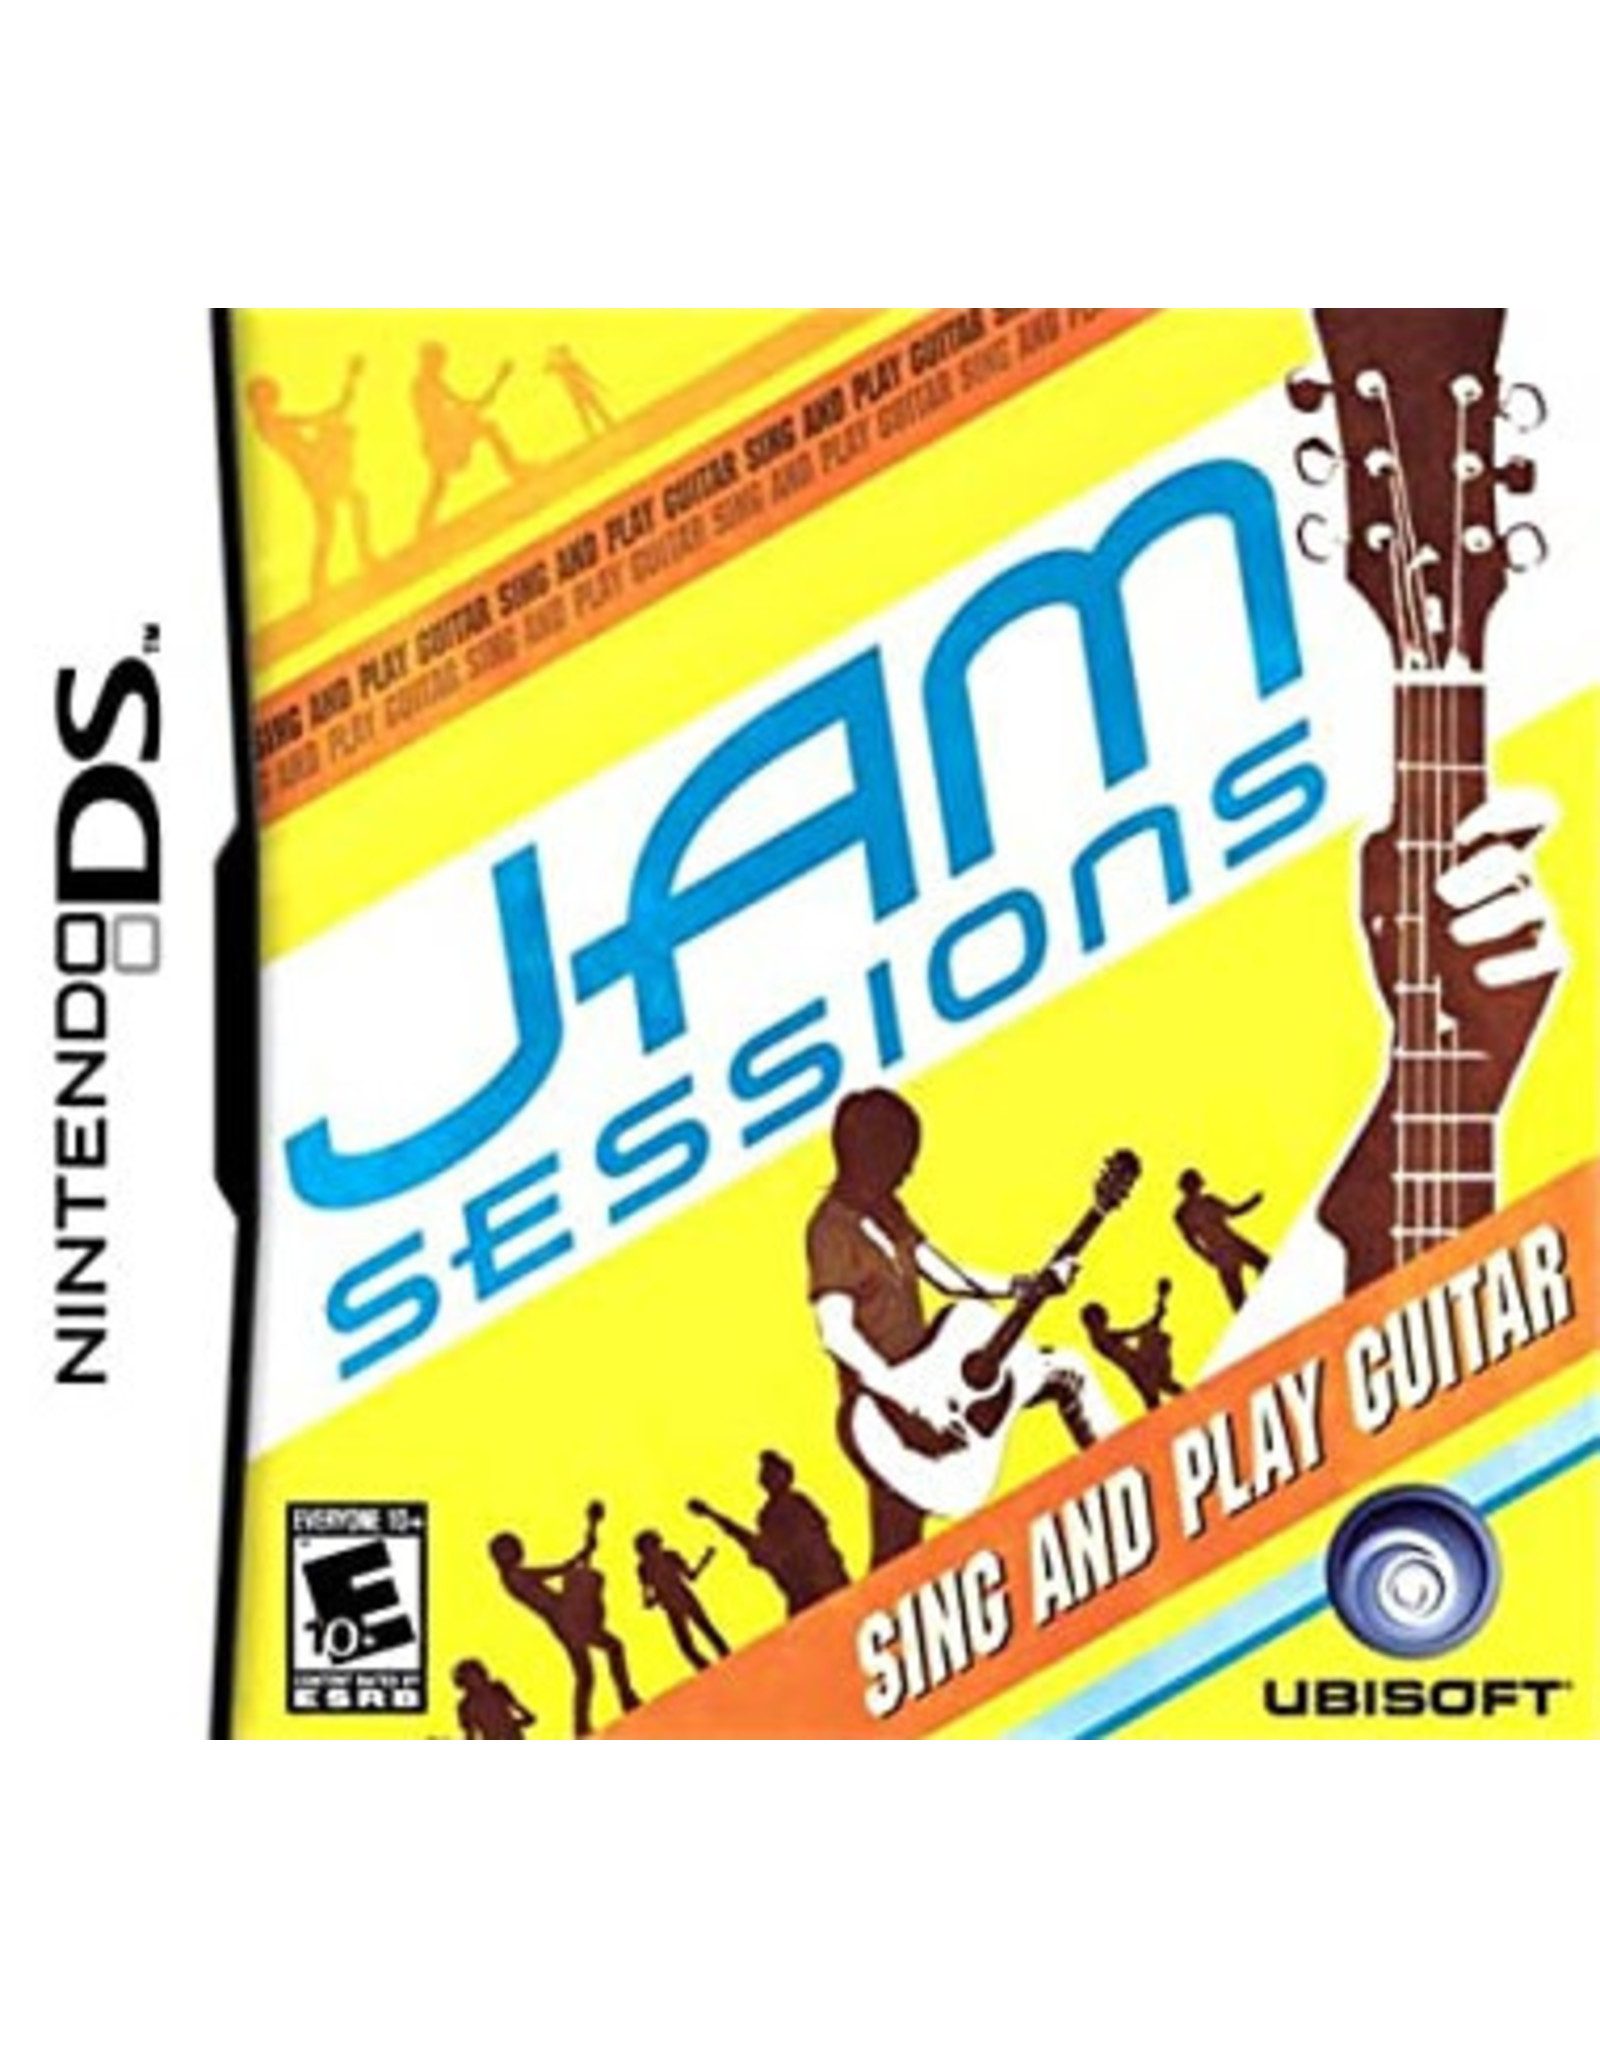 Nintendo DS Jam Sessions  (Cart Only)